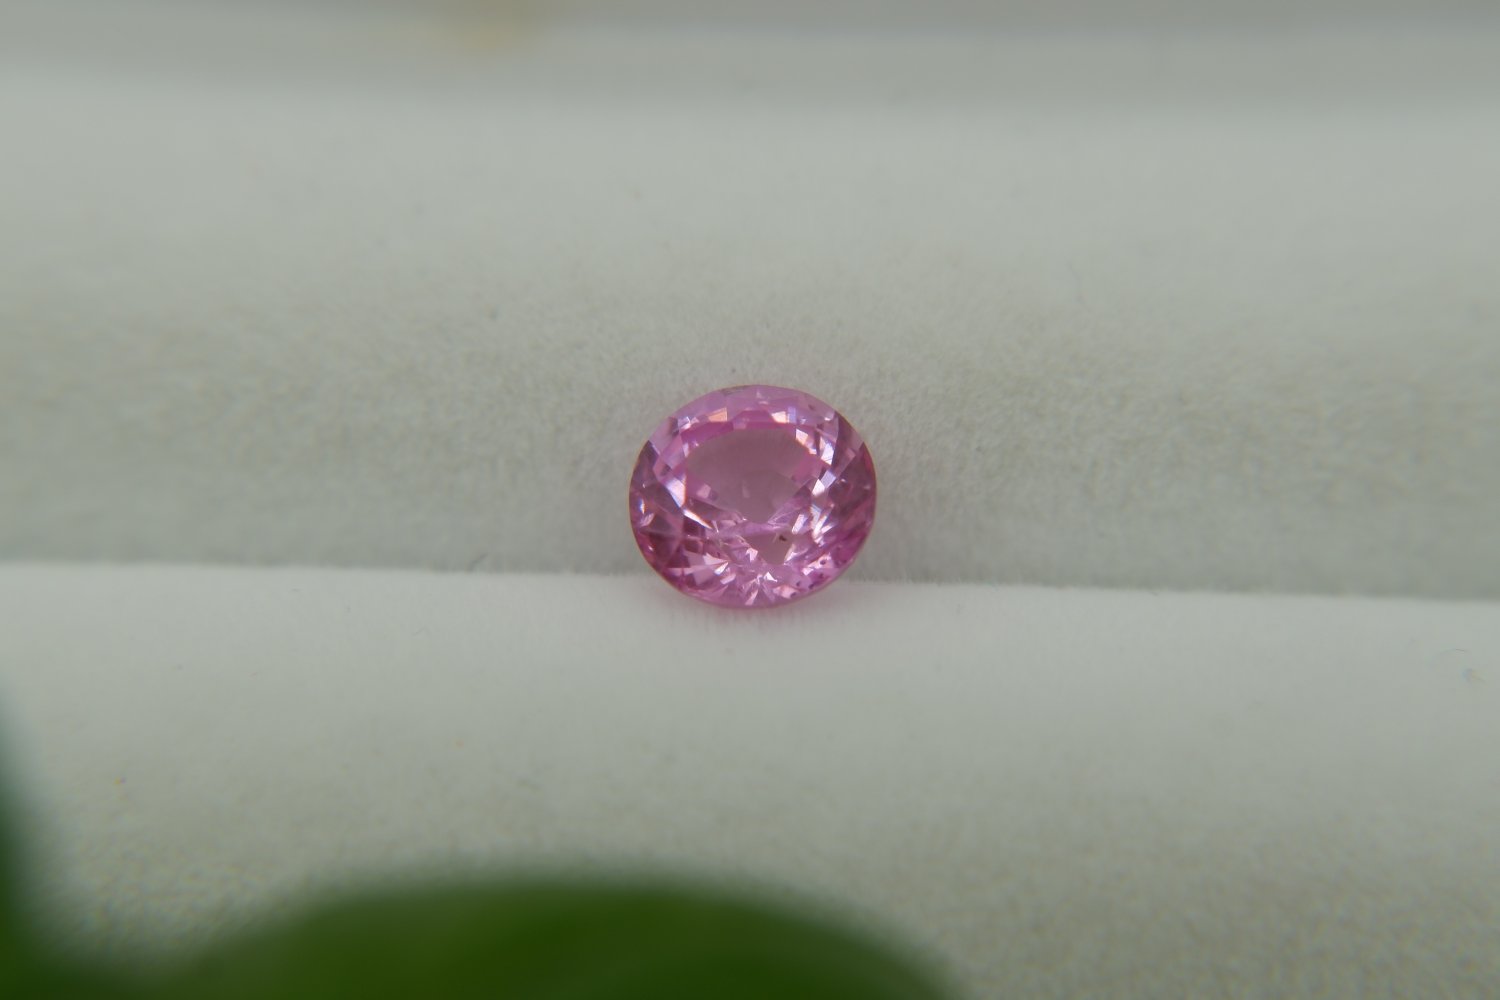  Pastel Pink Sapphire, handcrafted Handcrafted round cut Sri Lanka